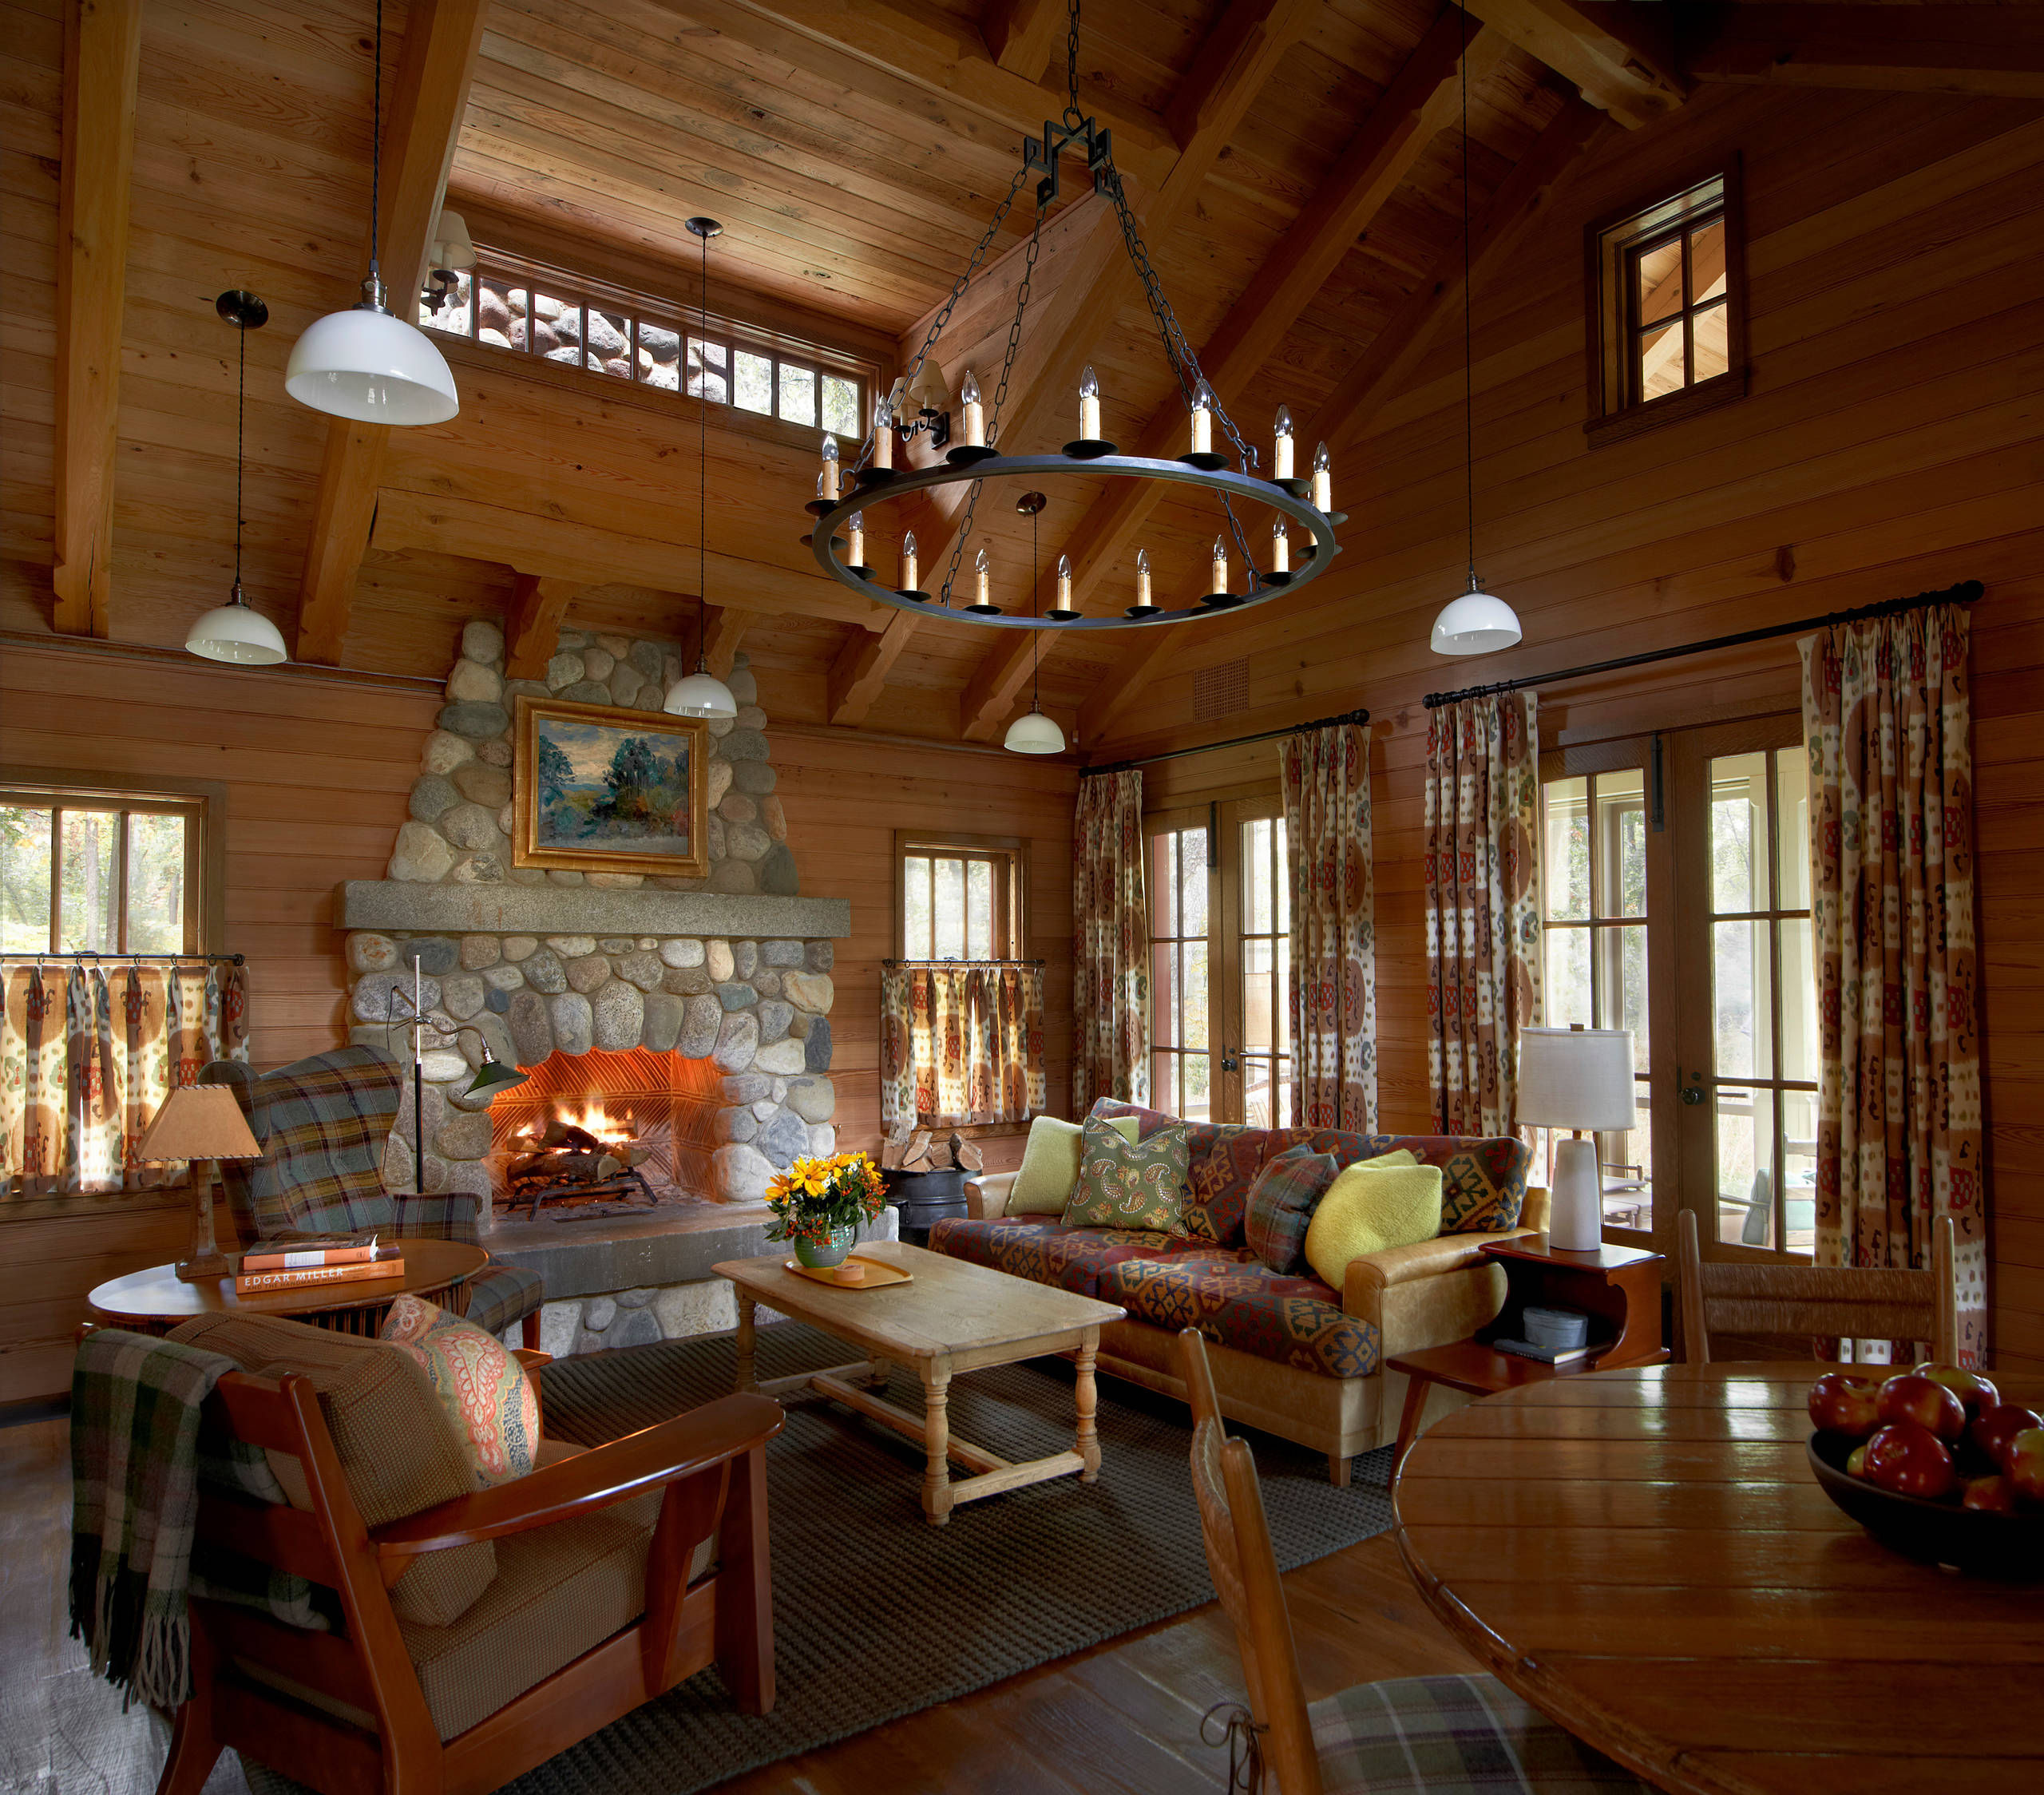 Country Interior Design: A Rustic Touch Of Comfort